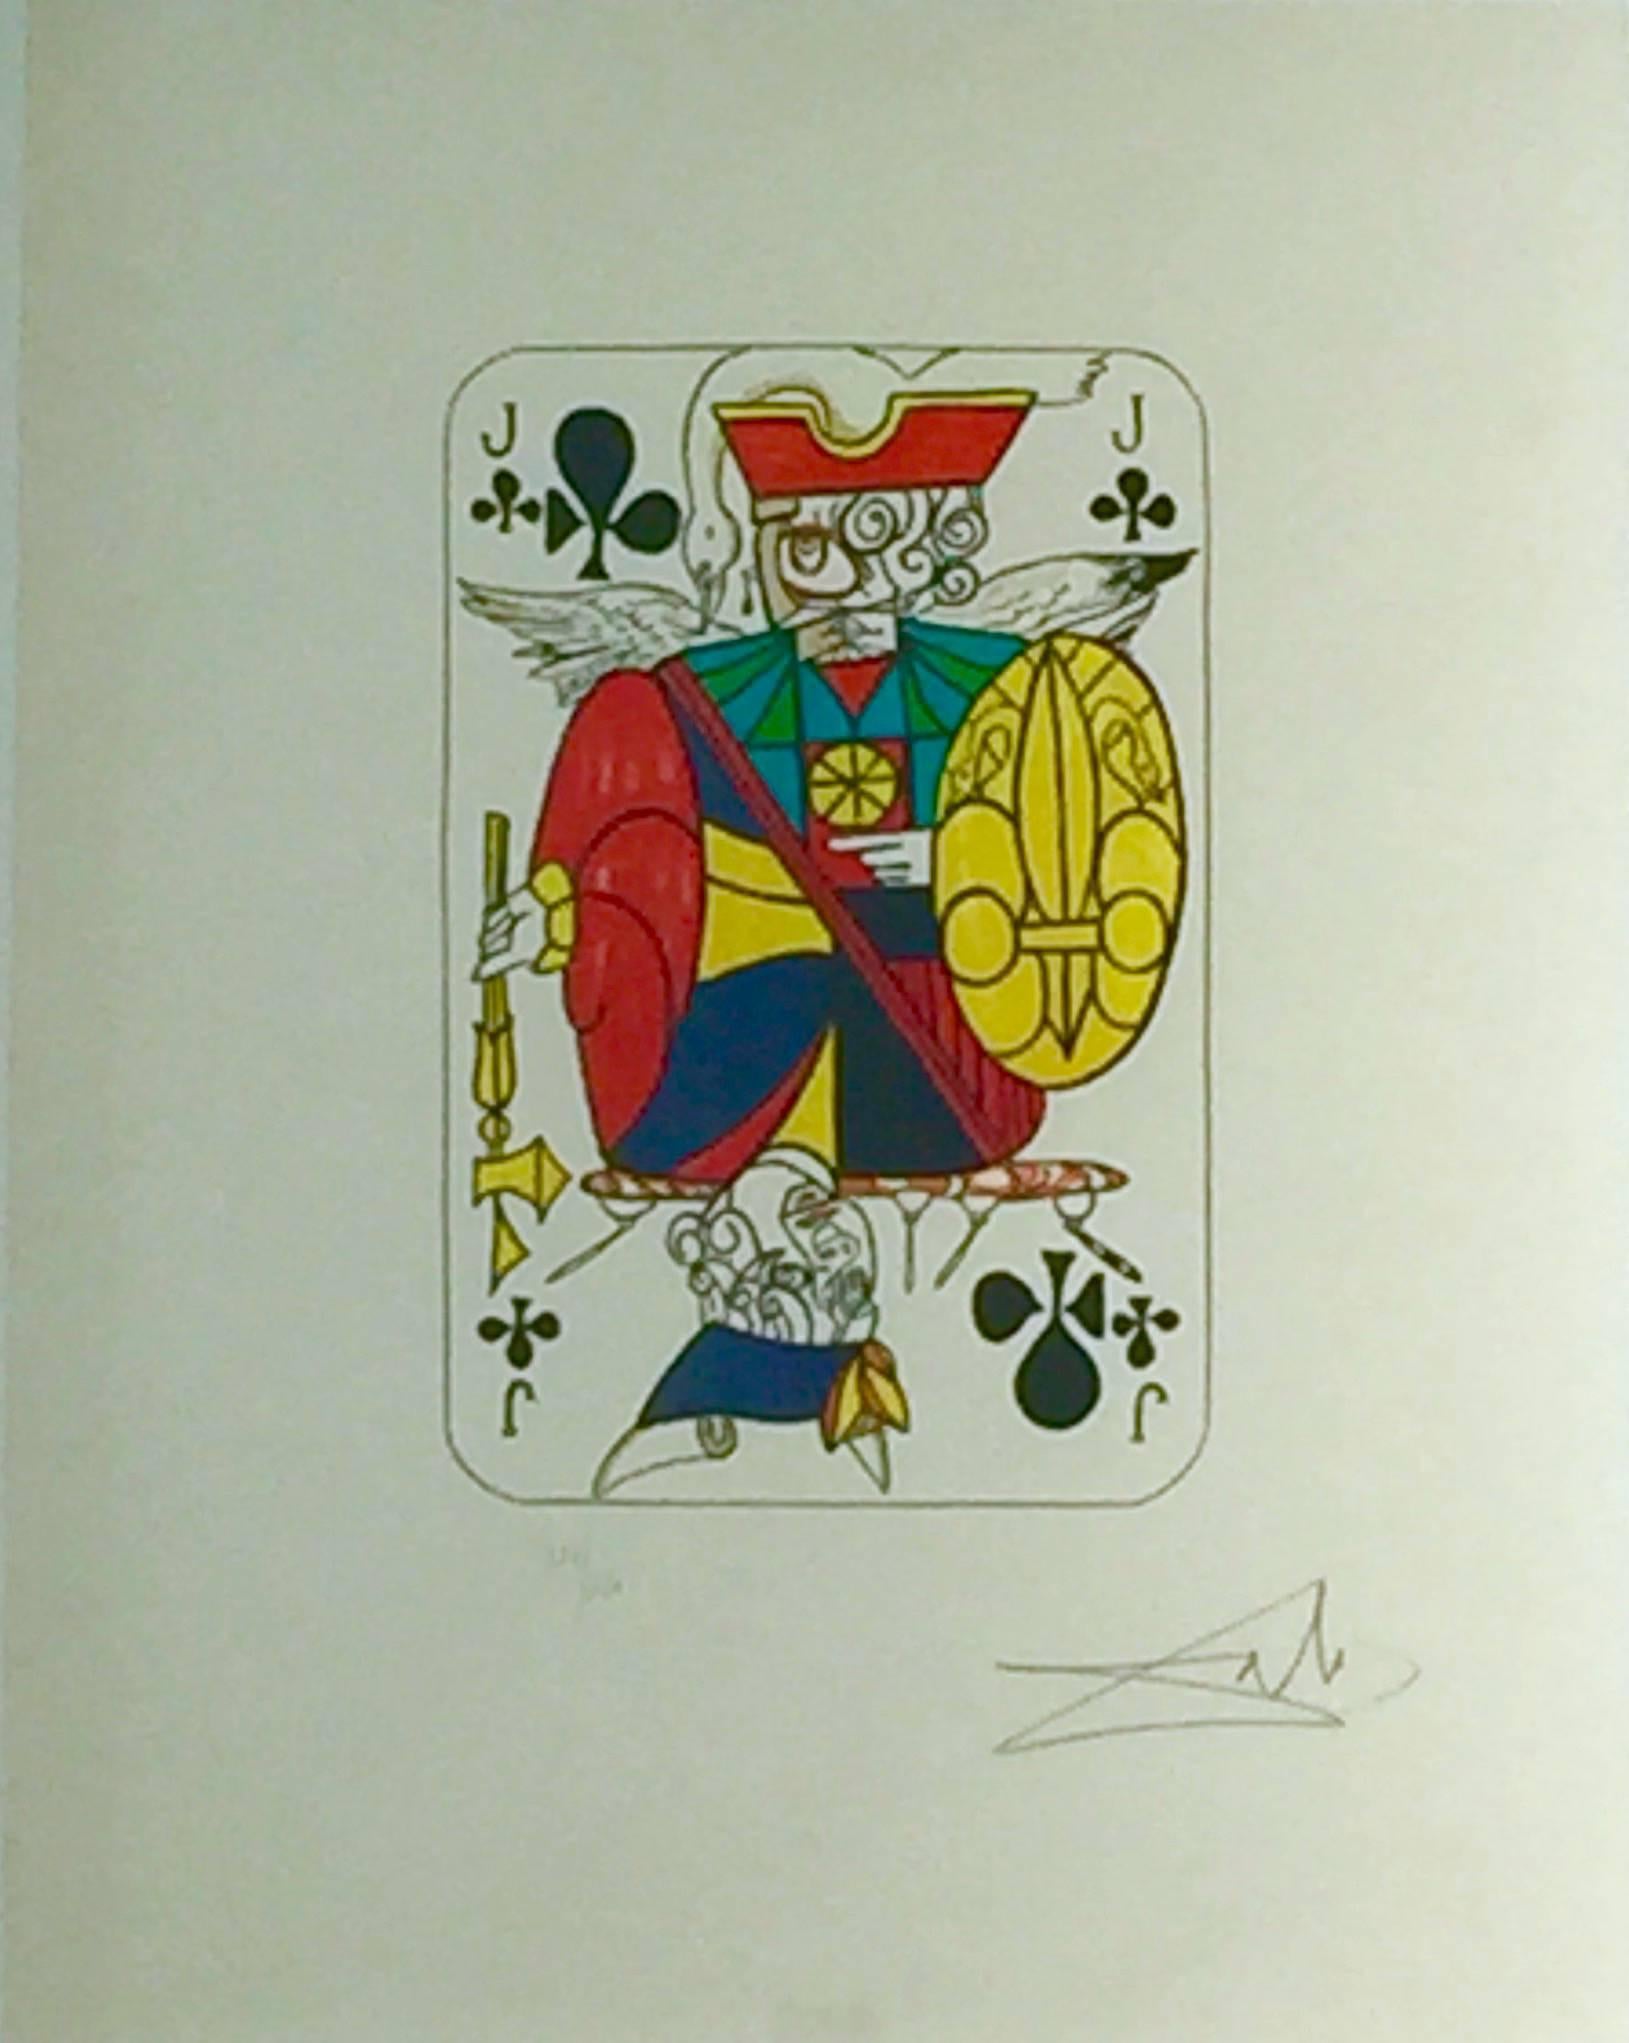 Jack of Clubs, from Playing Cards - Print by Salvador Dalí